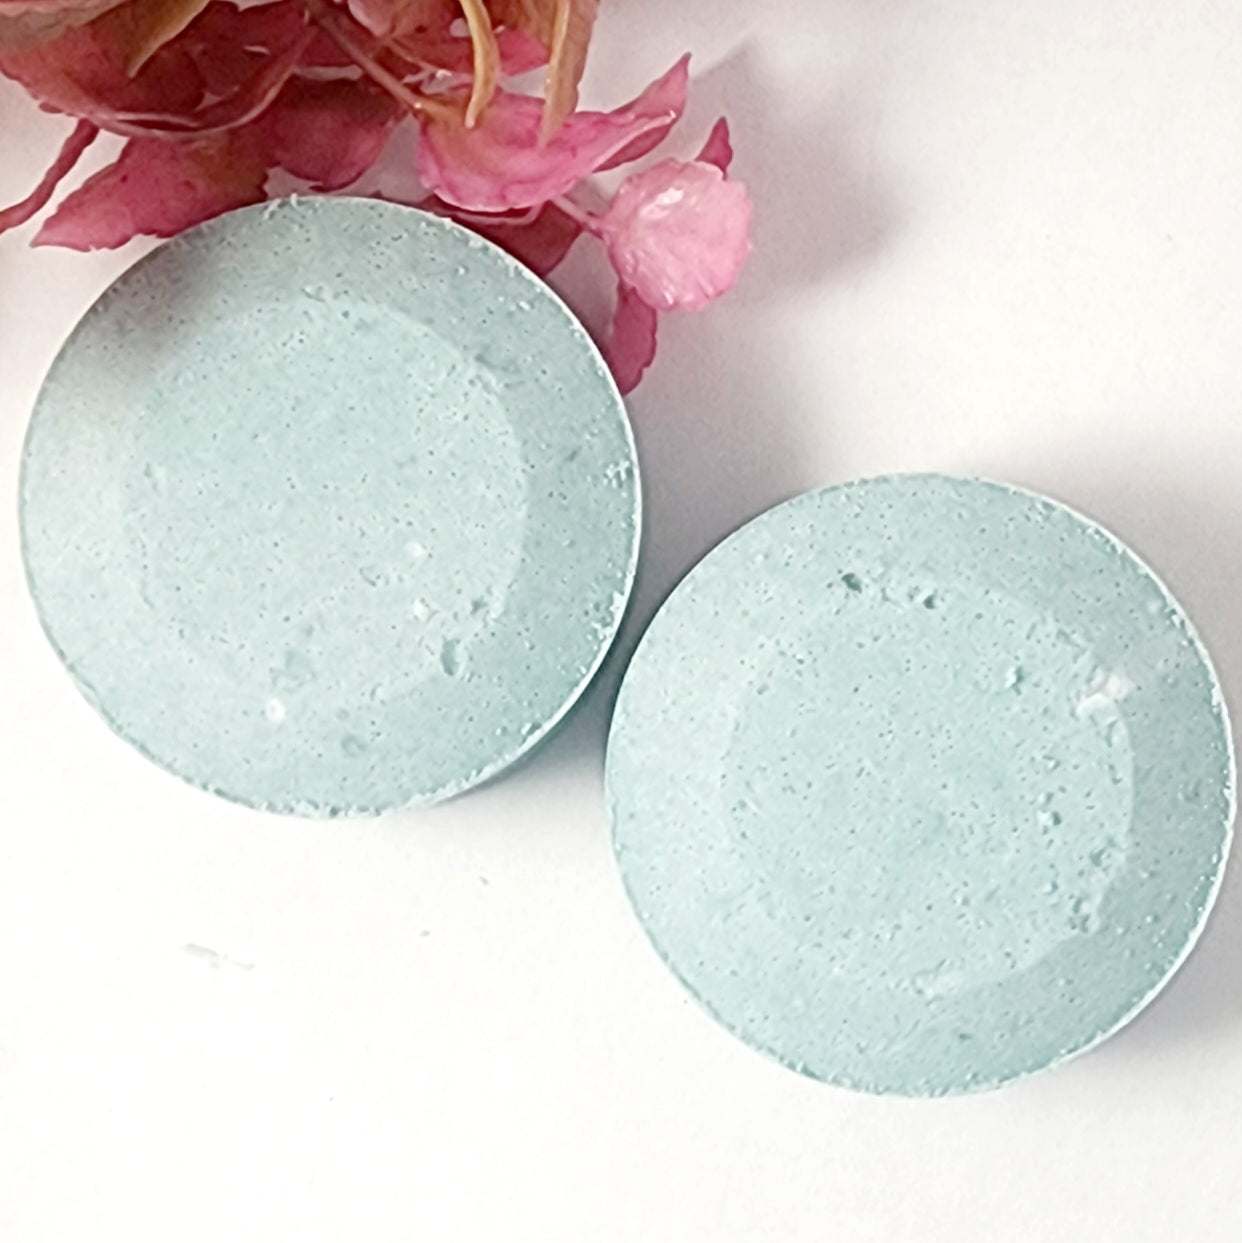 Spearmint & Eucalyptus Shower Steamer - Diana's Candles and Soaps 